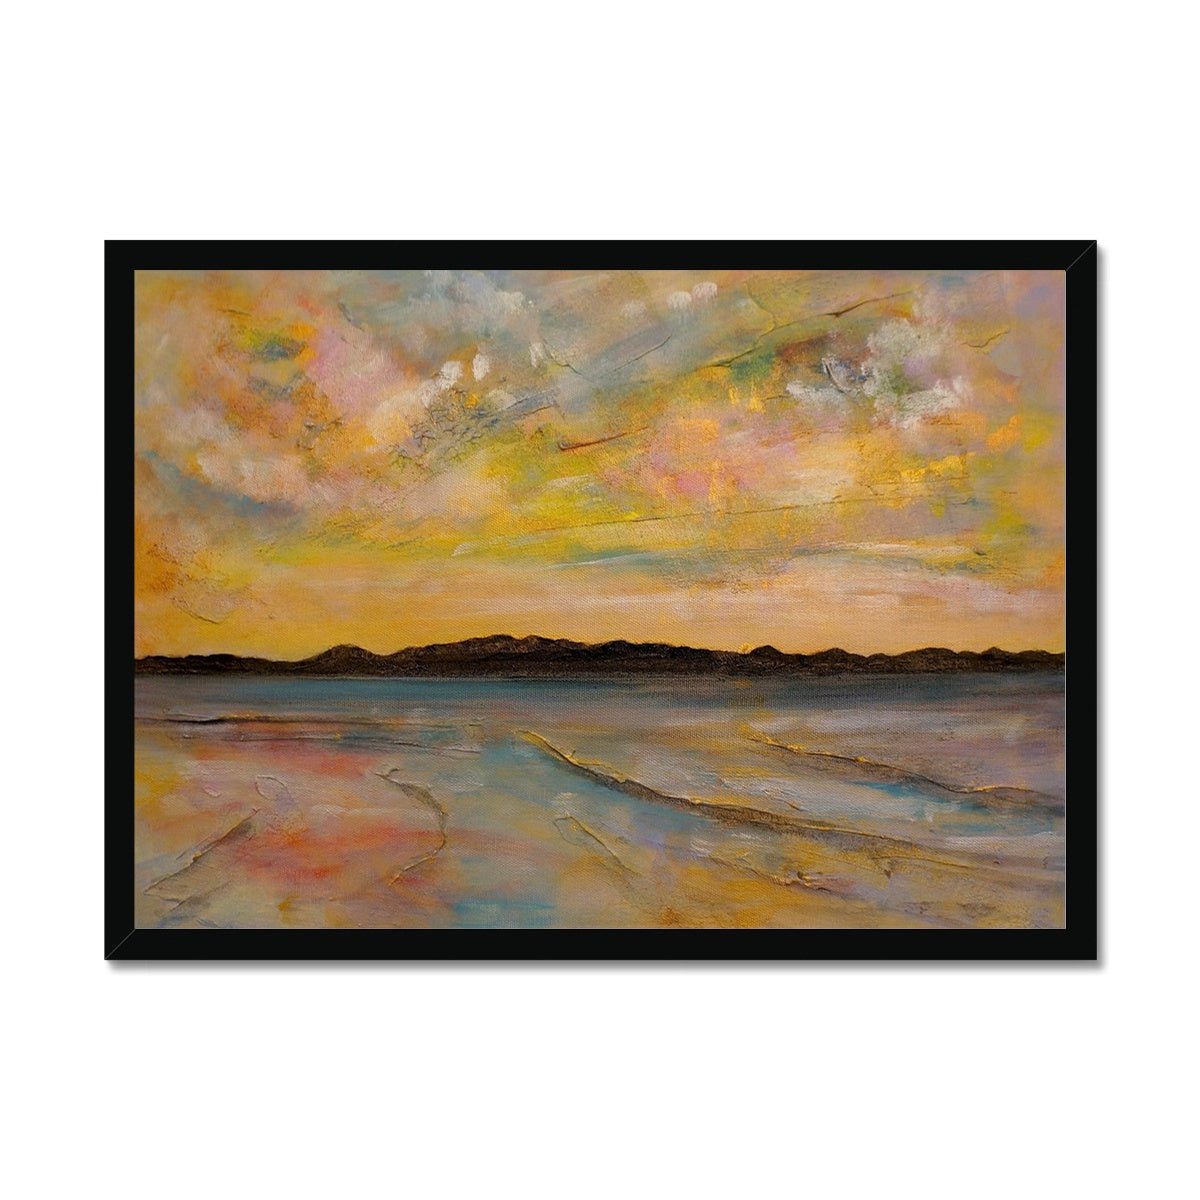 Vallay Island North Uist Painting | Framed Prints From Scotland-Framed Prints-Hebridean Islands Art Gallery-A2 Landscape-Black Frame-Paintings, Prints, Homeware, Art Gifts From Scotland By Scottish Artist Kevin Hunter